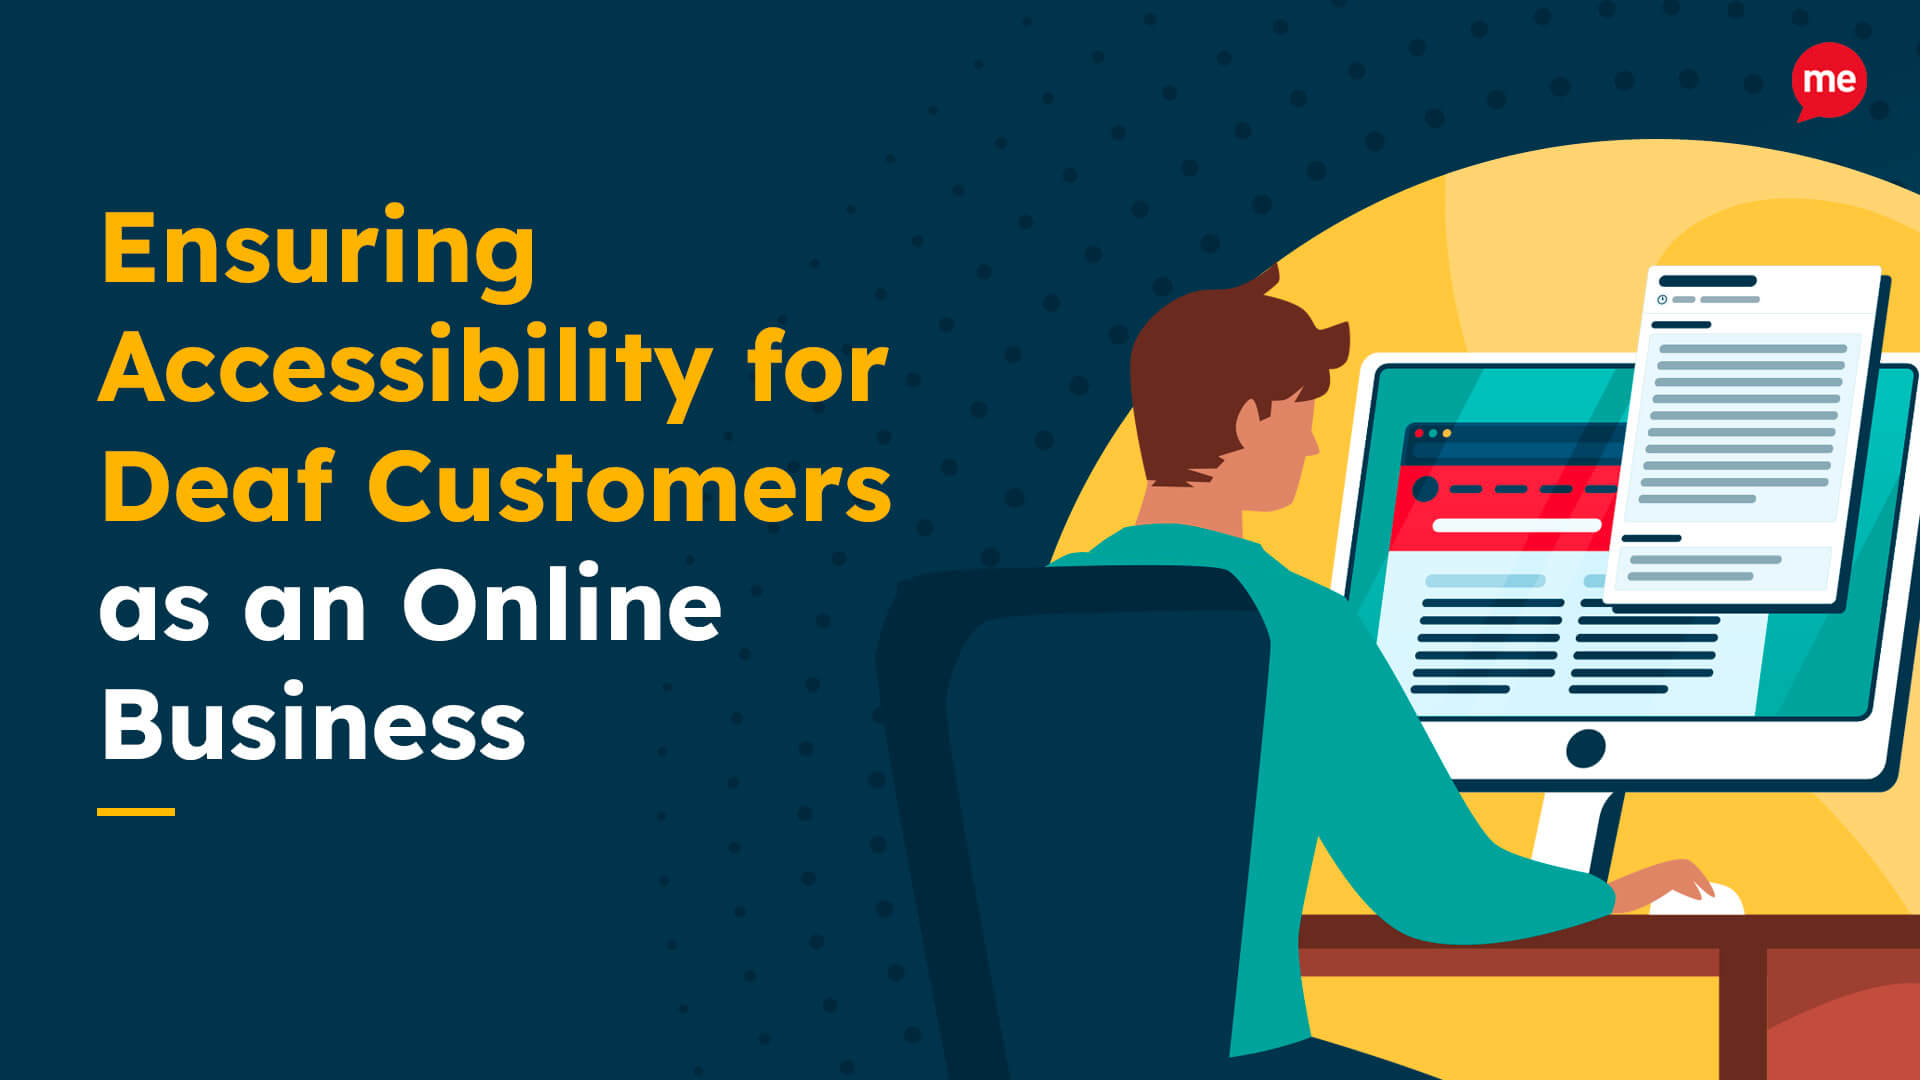 Ensuring Accessibility for Deaf Customers as an Online Business